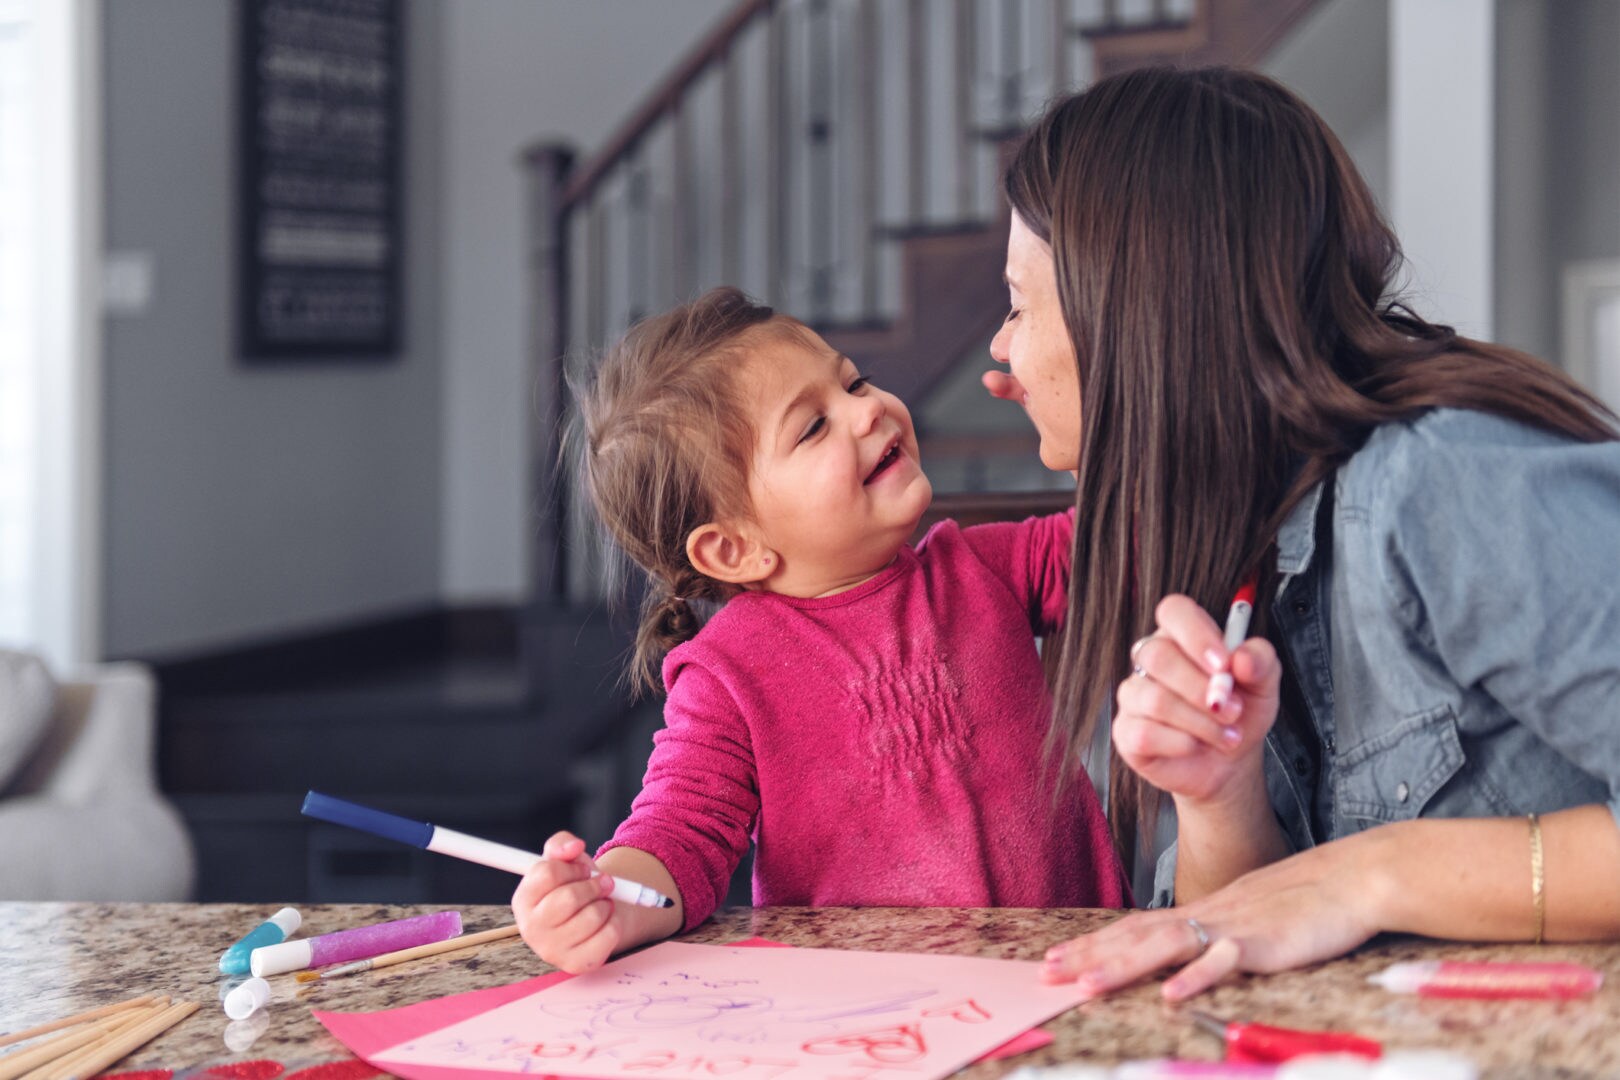 These are the easiest cities to find a Valentine’s Day babysitting job